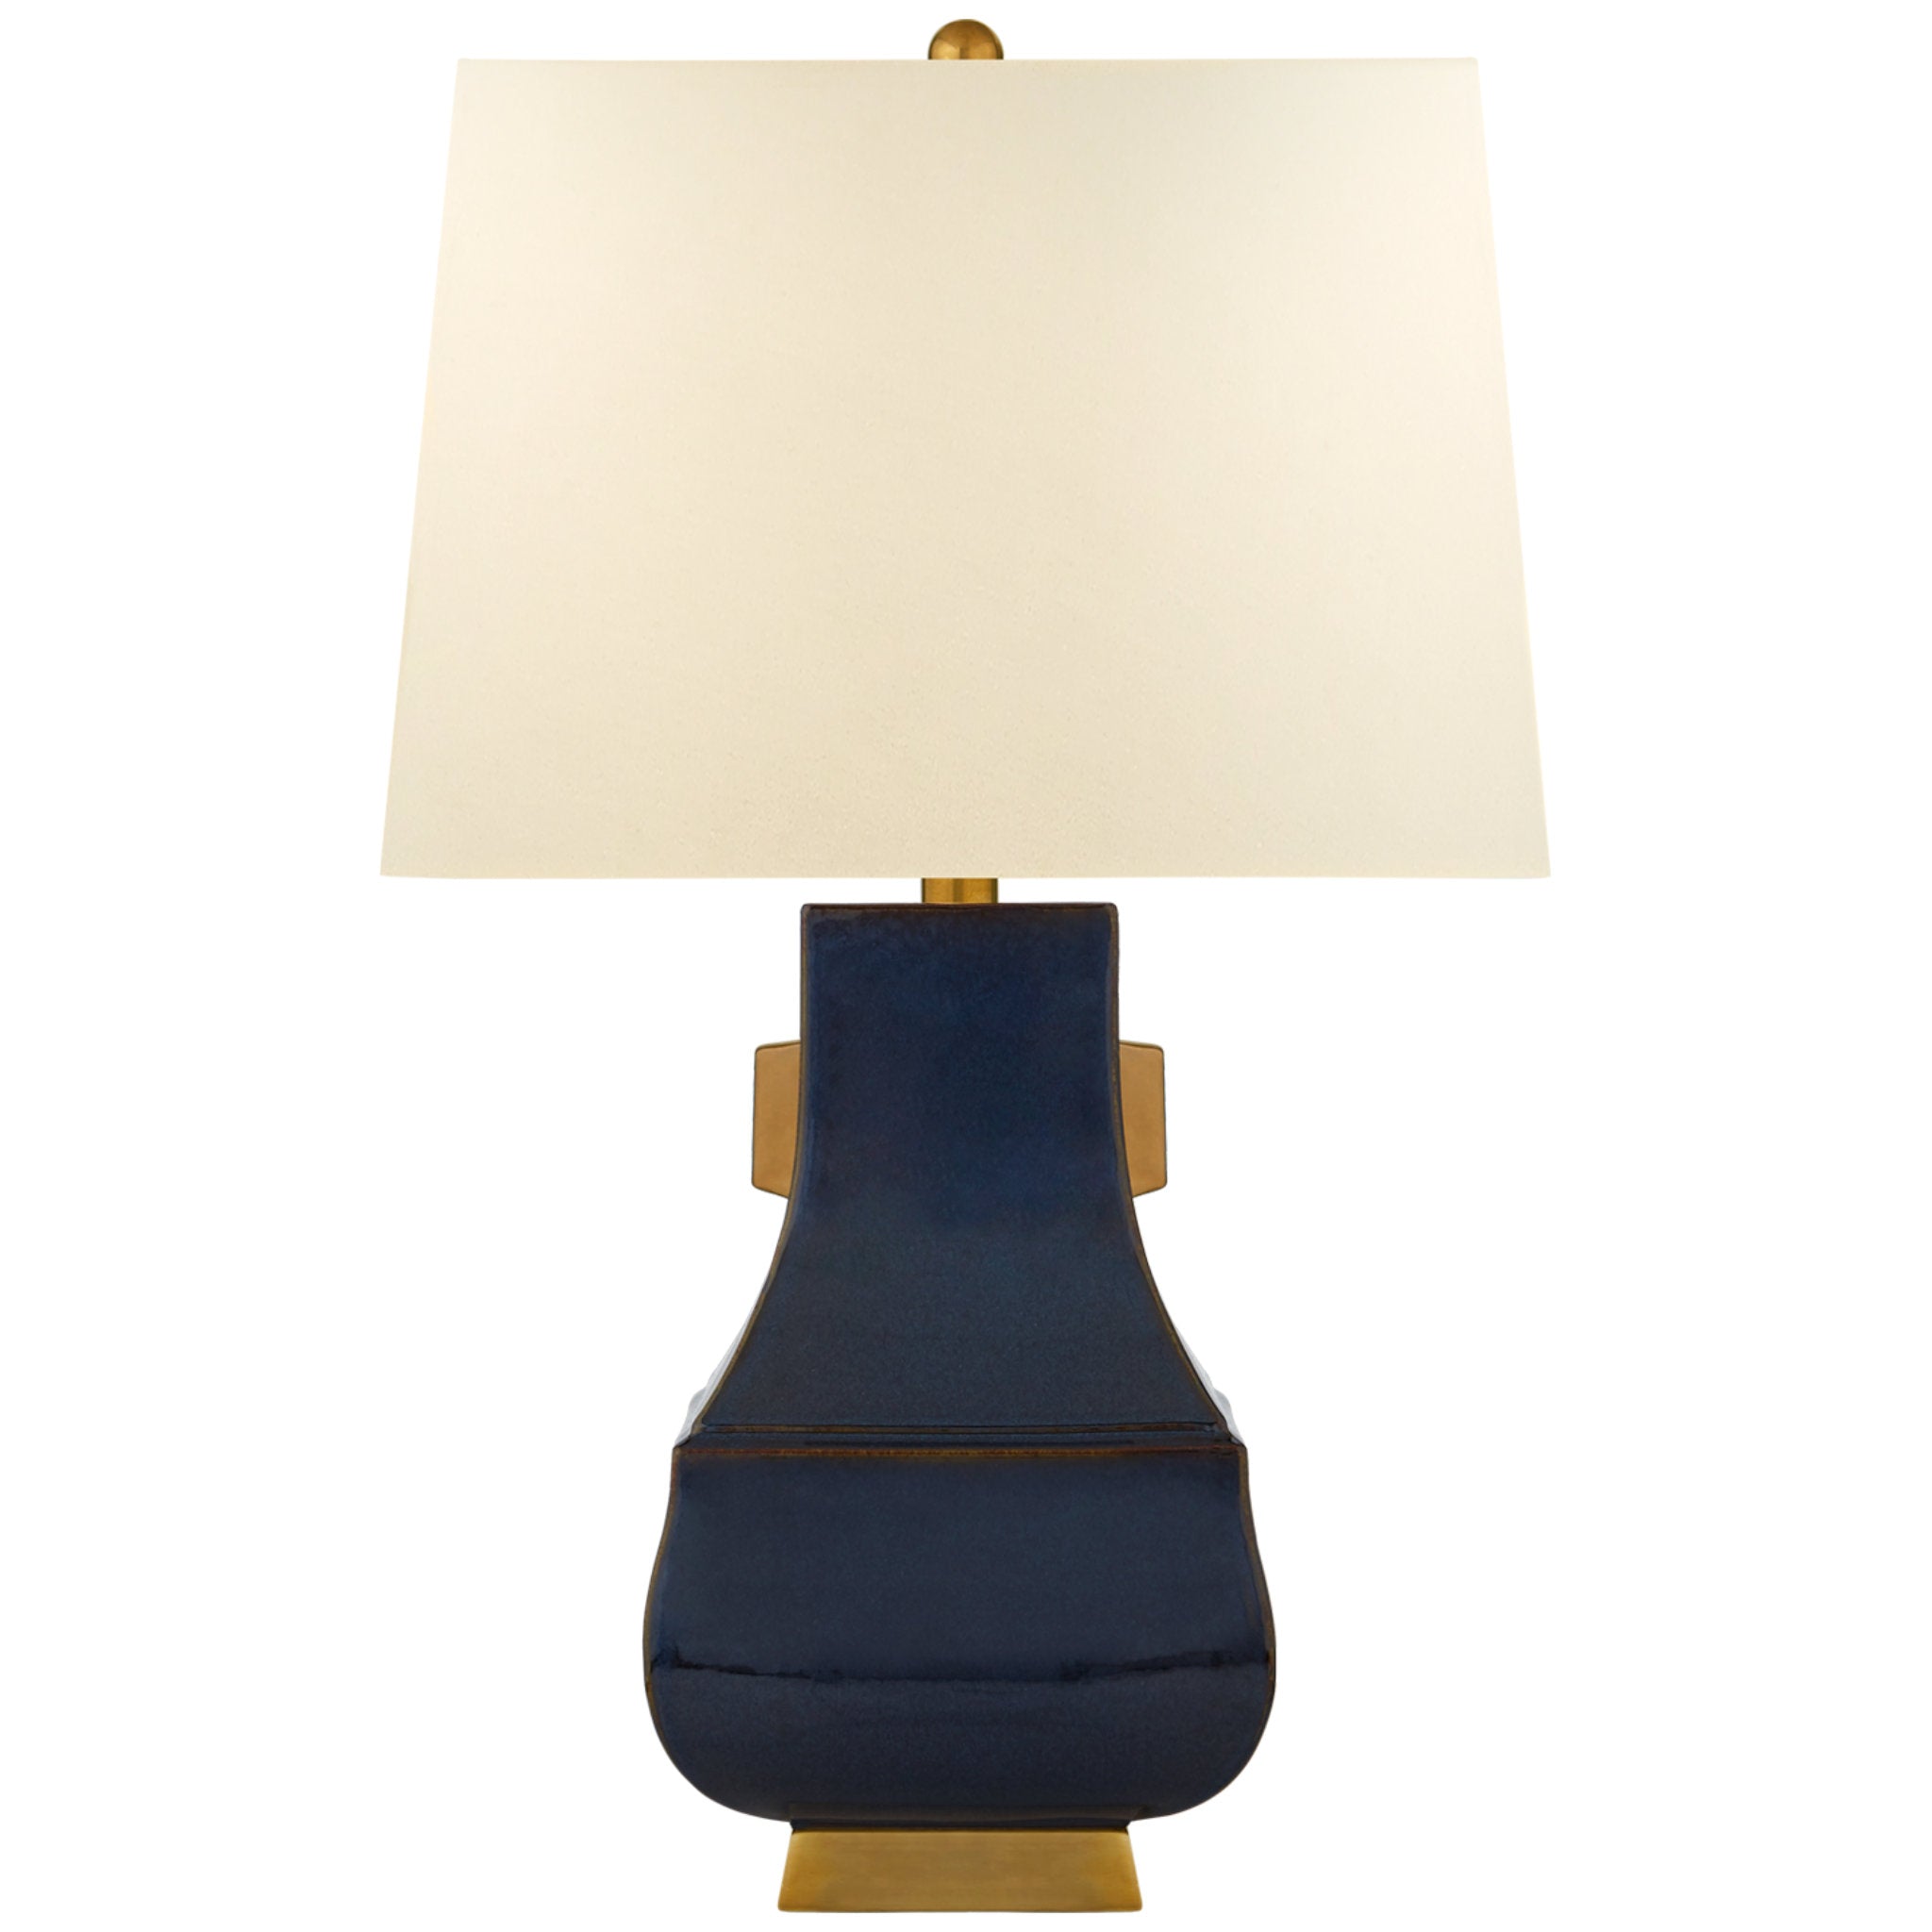 Chapman & Myers Kang Jug Large Table Lamp in Mixed Blue Brown and Burnt Gold Accent with Natural Percale Shade